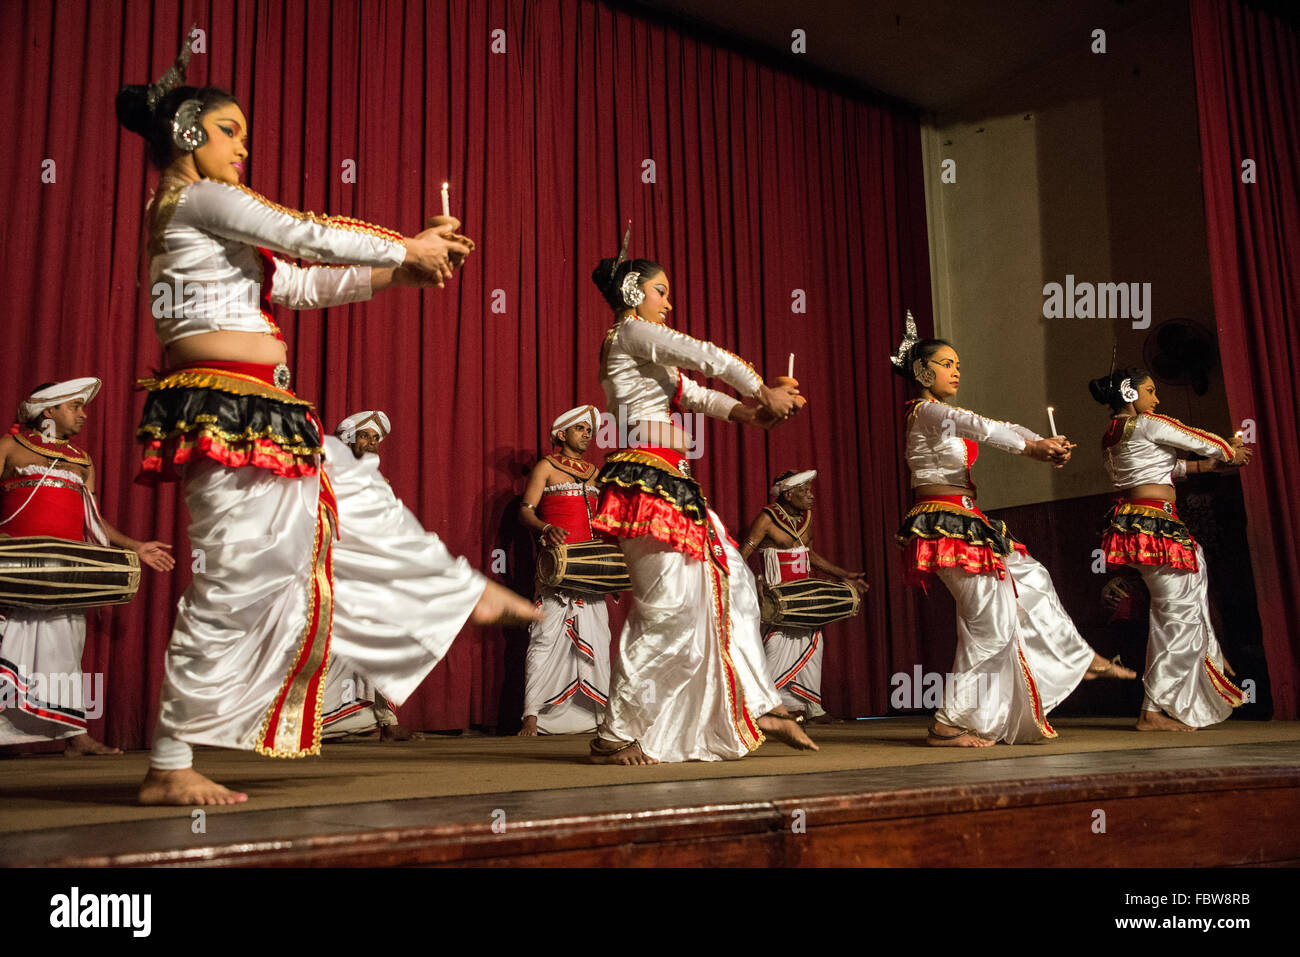 A Group Of Kandyan Dancers Performing The Pooja Dance With The Kandyan Drummers Part Of The